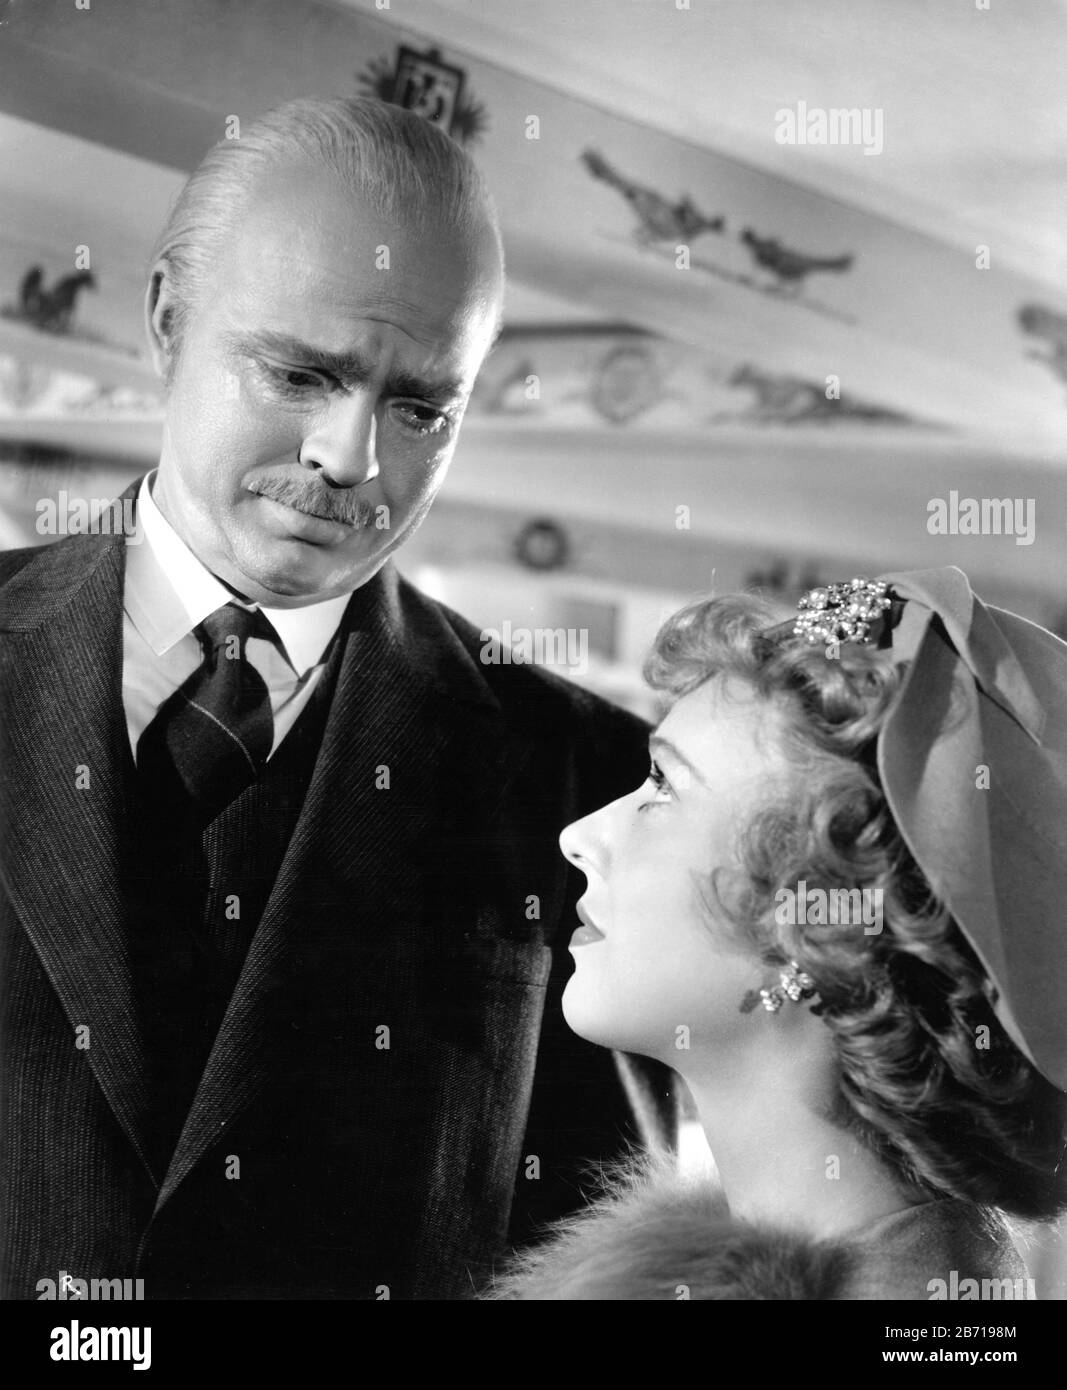 ORSON WELLES as Charles Foster Kane and DOROTHY COMINGORE as Susan Alexander Kane in CITIZEN KANE 1941 director Orson Welles screenplay Herman J. Mankiewicz and Orson Welles music Bernard Herrmann Mercury Productions / RKO Radio Pictures Stock Photo